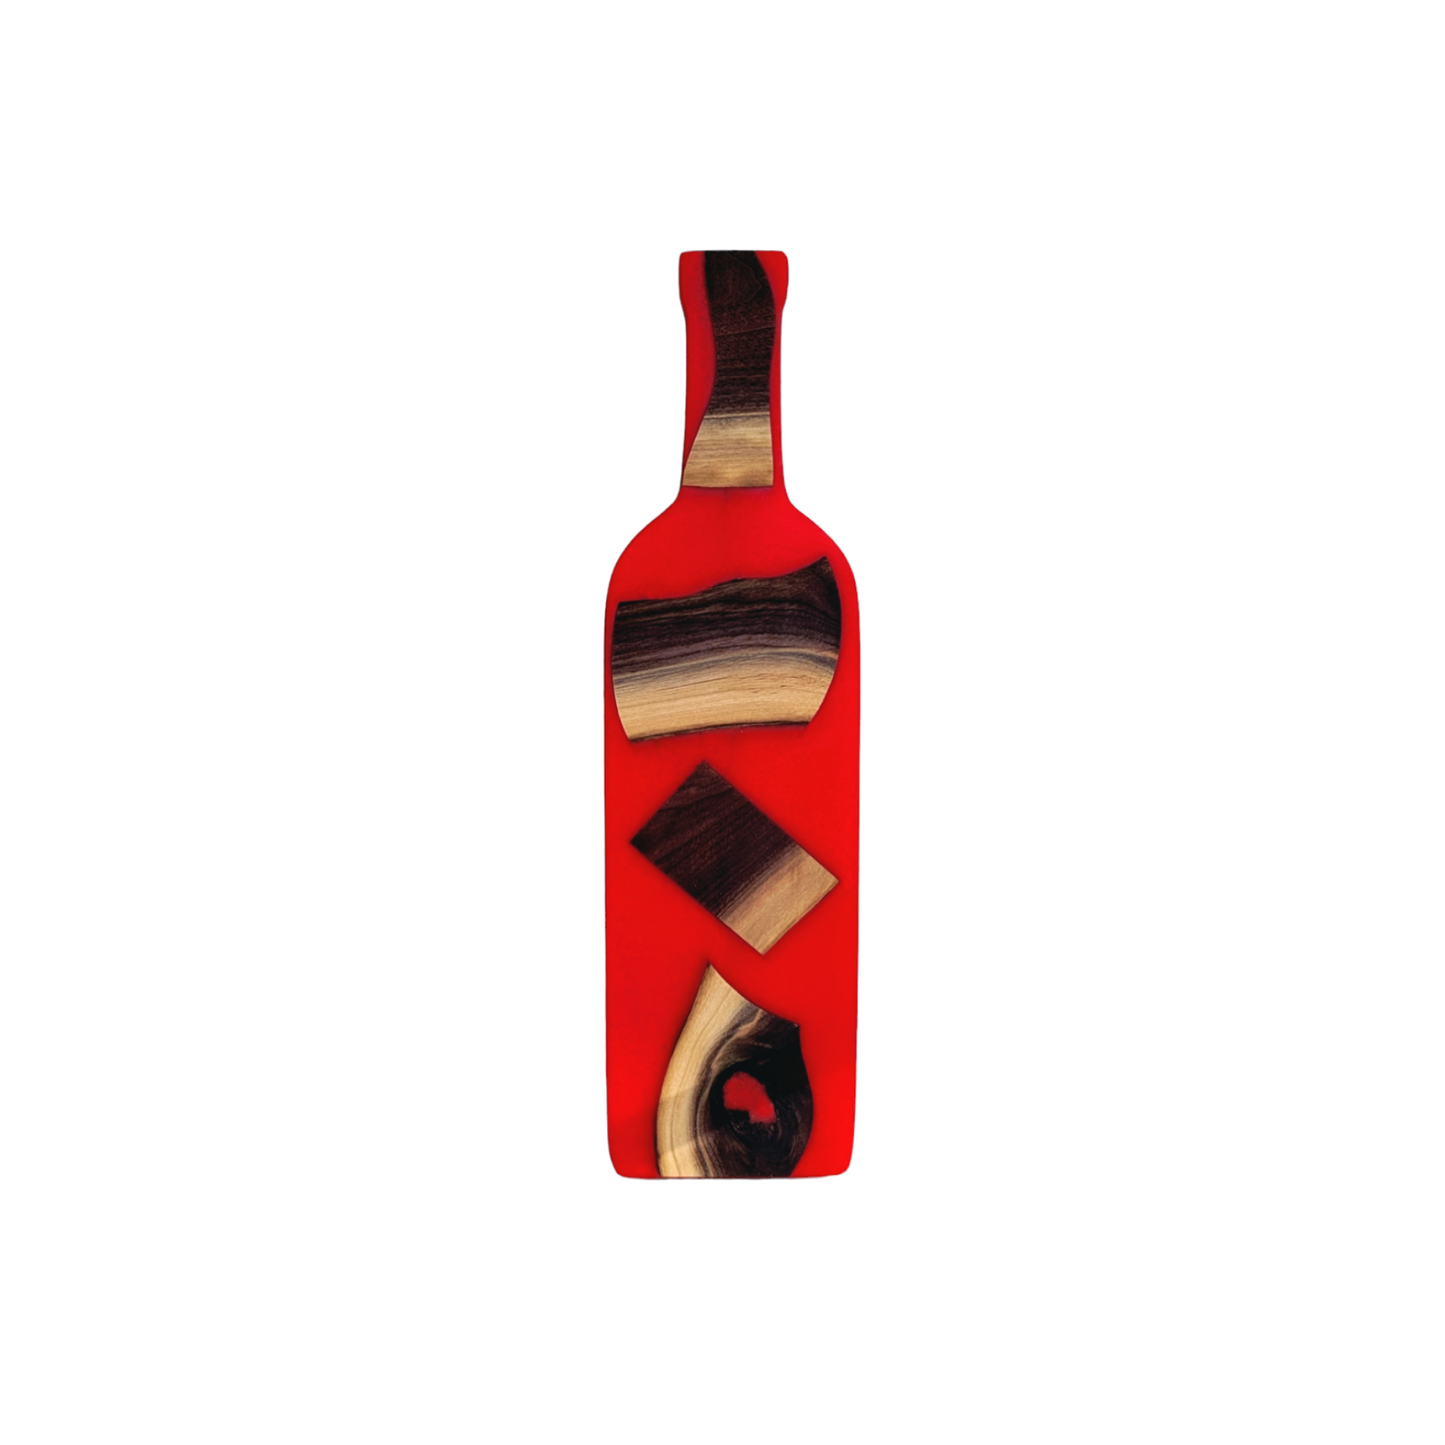 Wood And Epoxy Wine Bottle Serving Tray